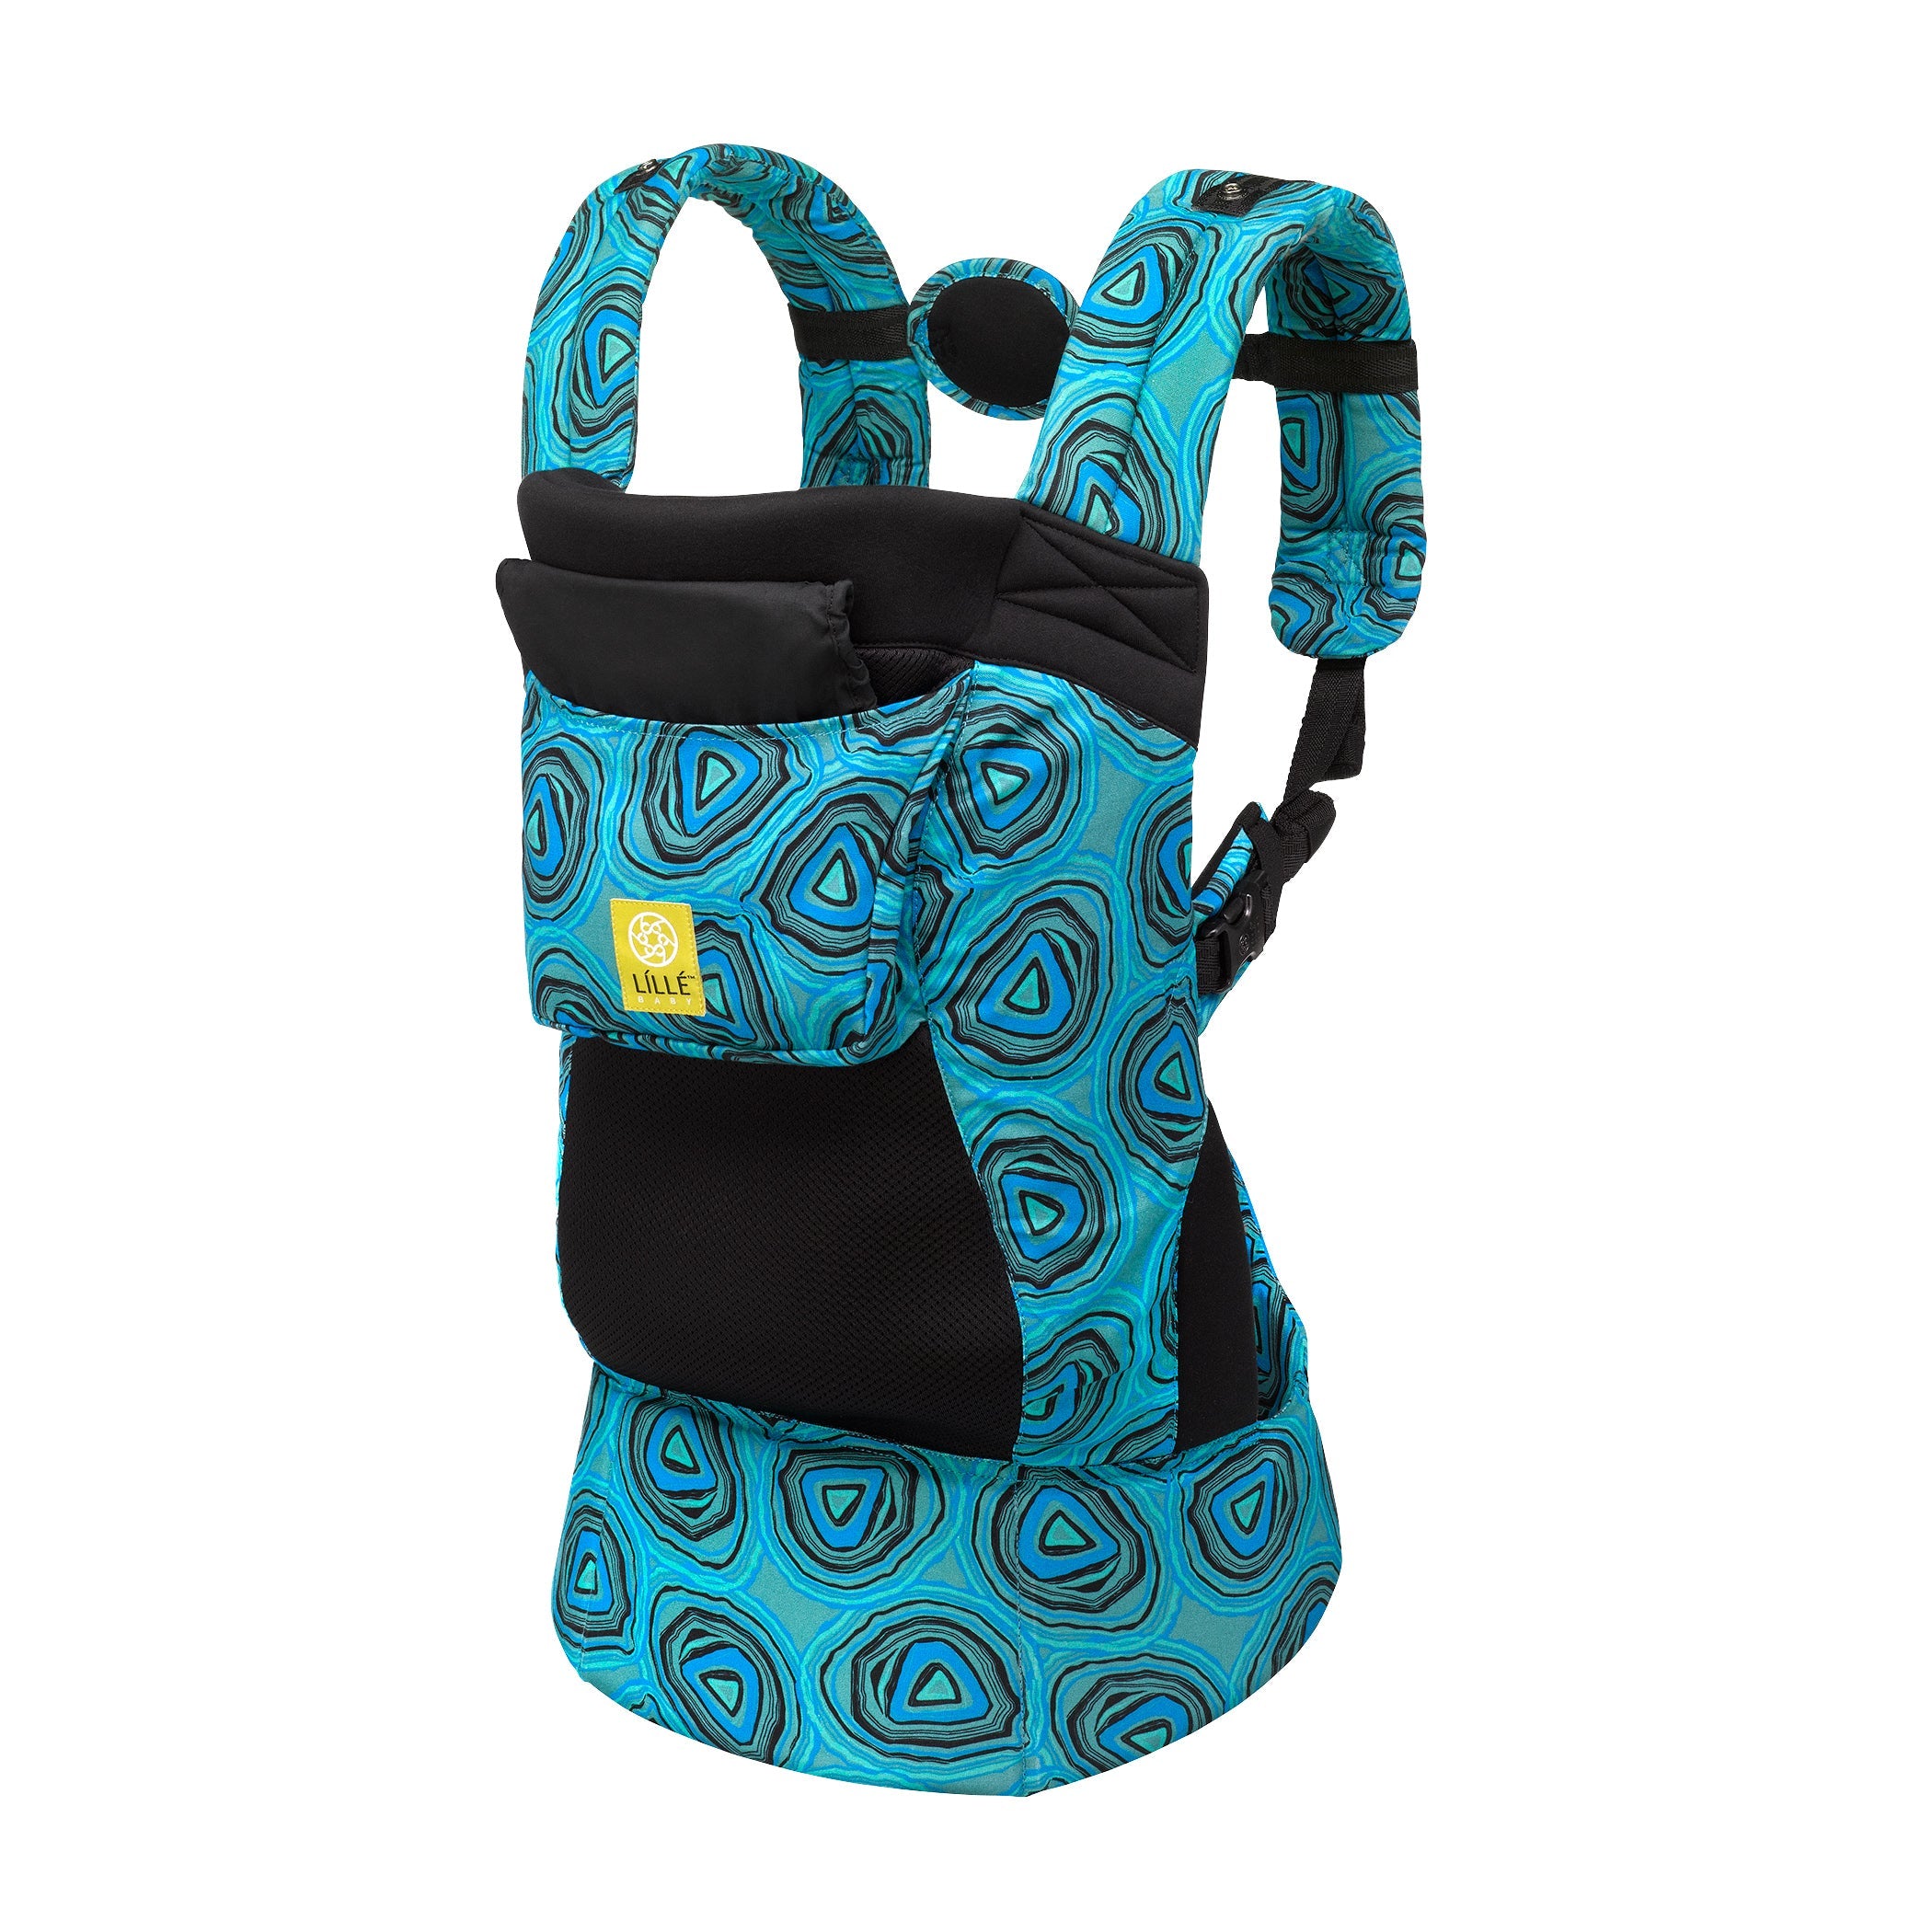 Toddler Carrier Carryon Airflow In Blue Agate Dlx